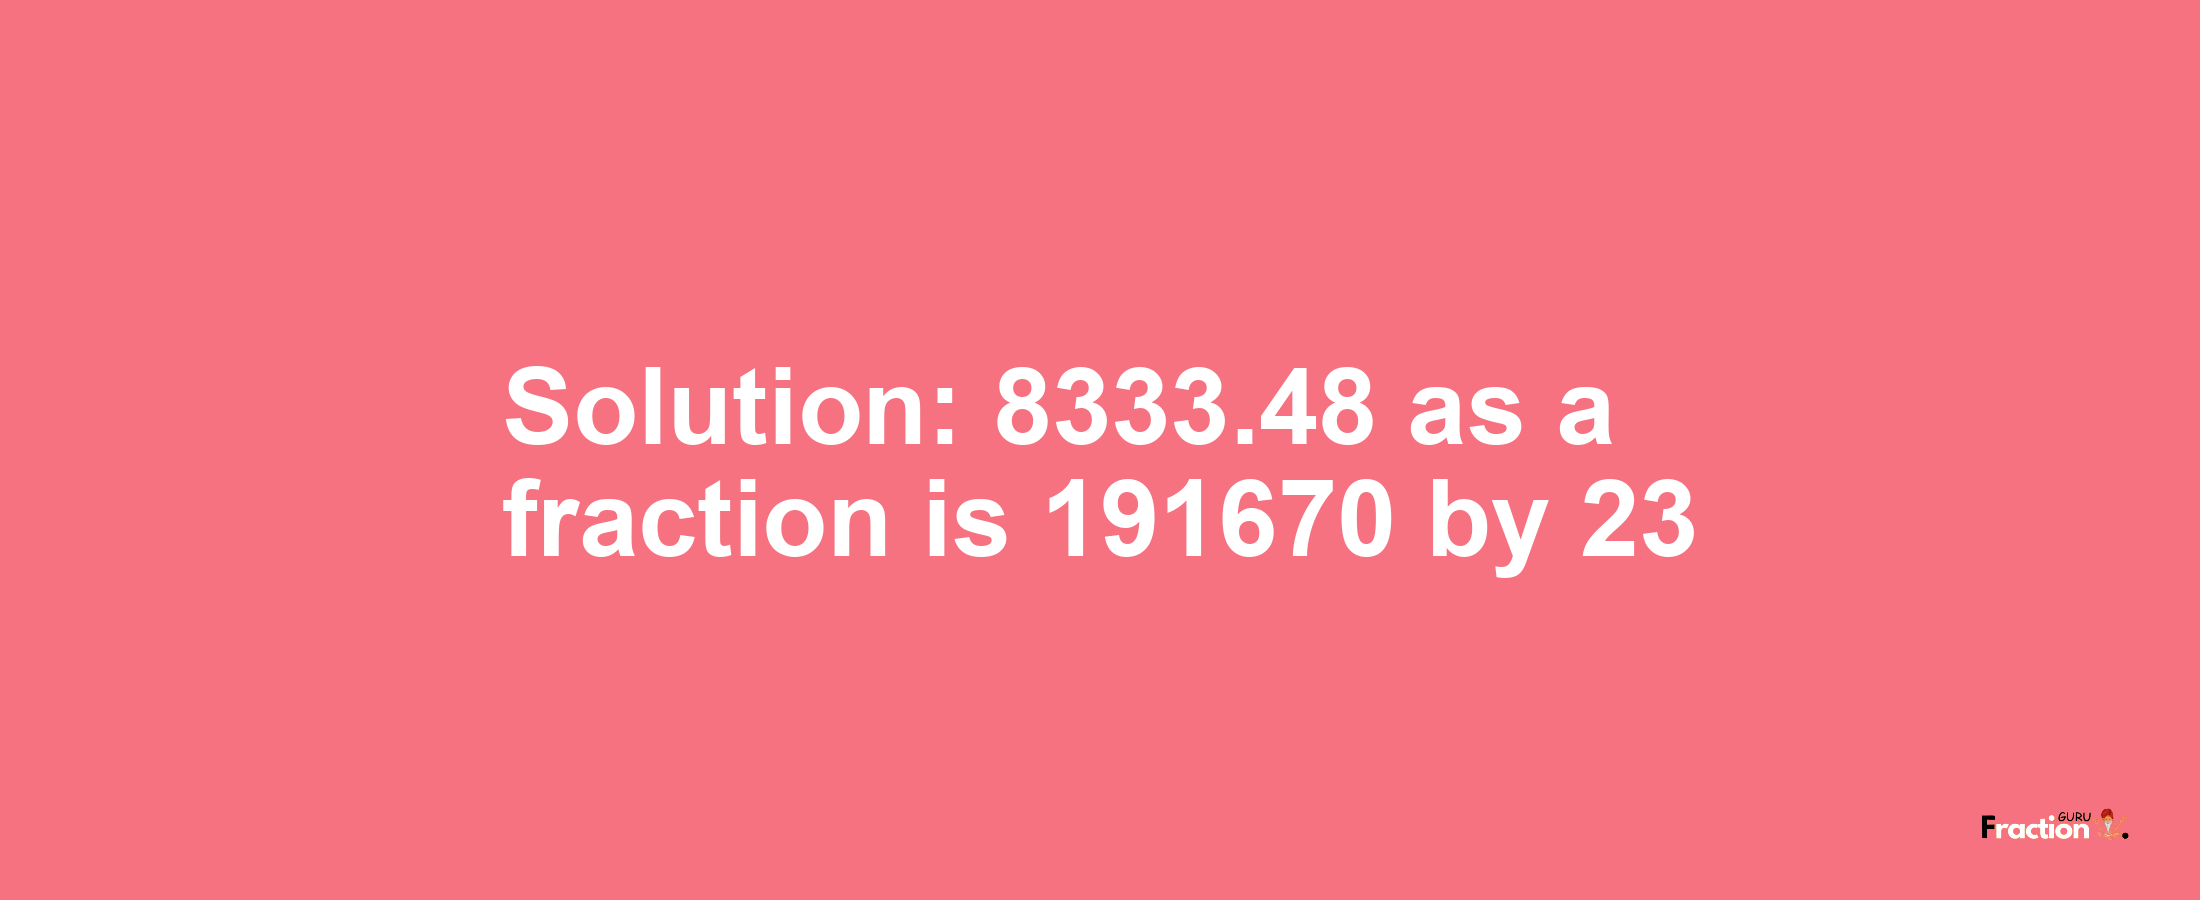 Solution:8333.48 as a fraction is 191670/23